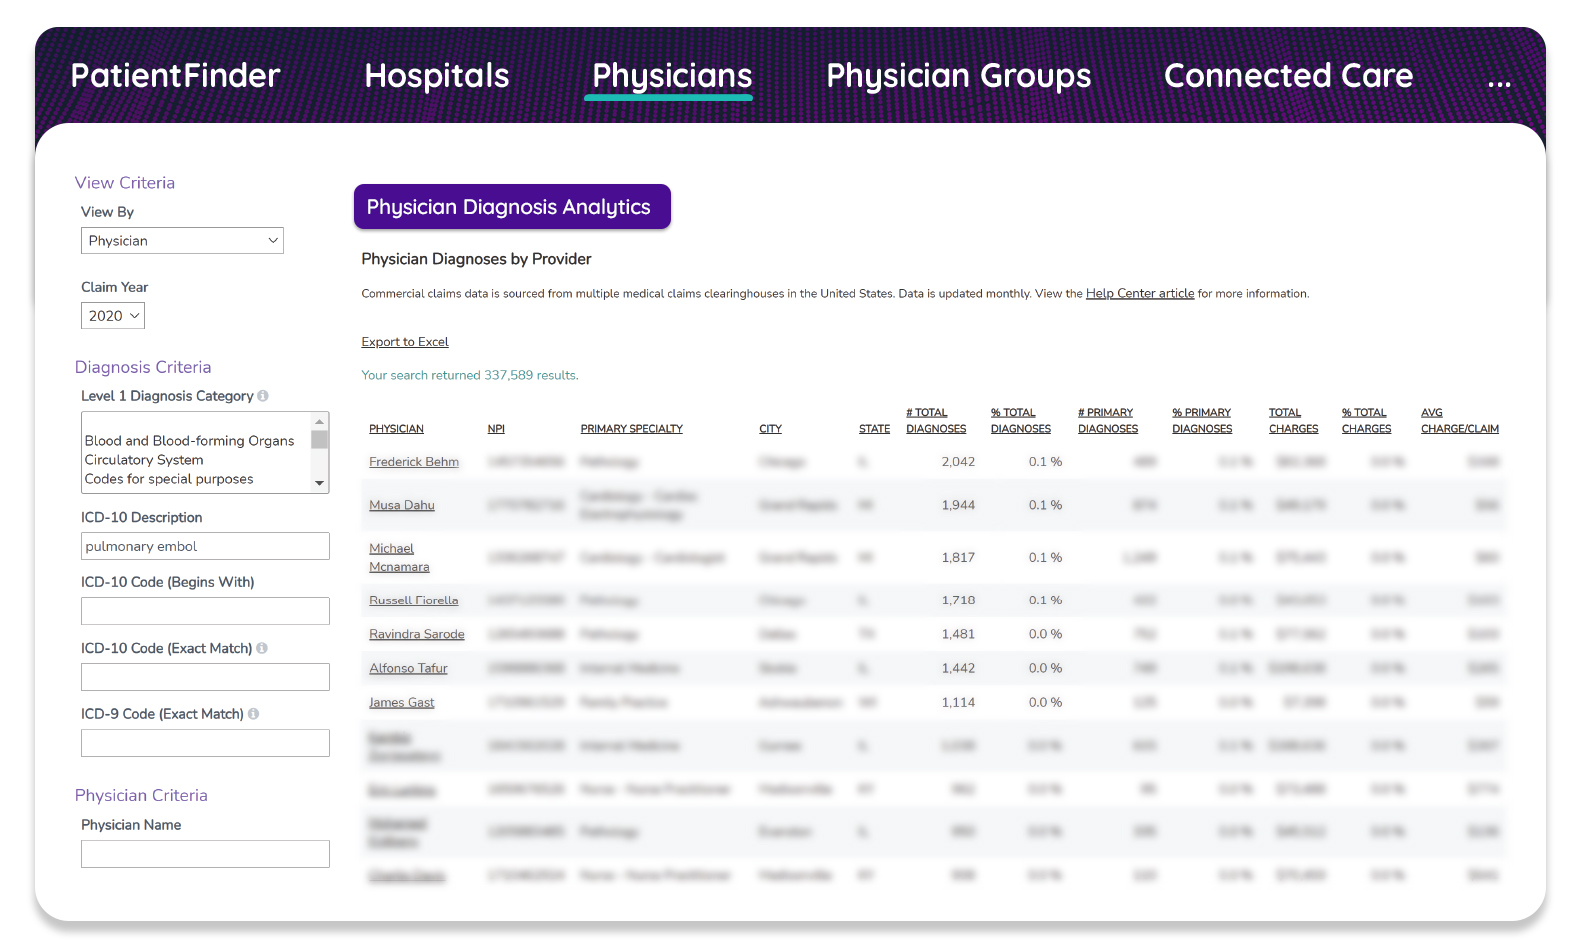 Screenshot of a search result for pulmonary embolisms diagnosed by physicians, with results listed from highest volume to lowest